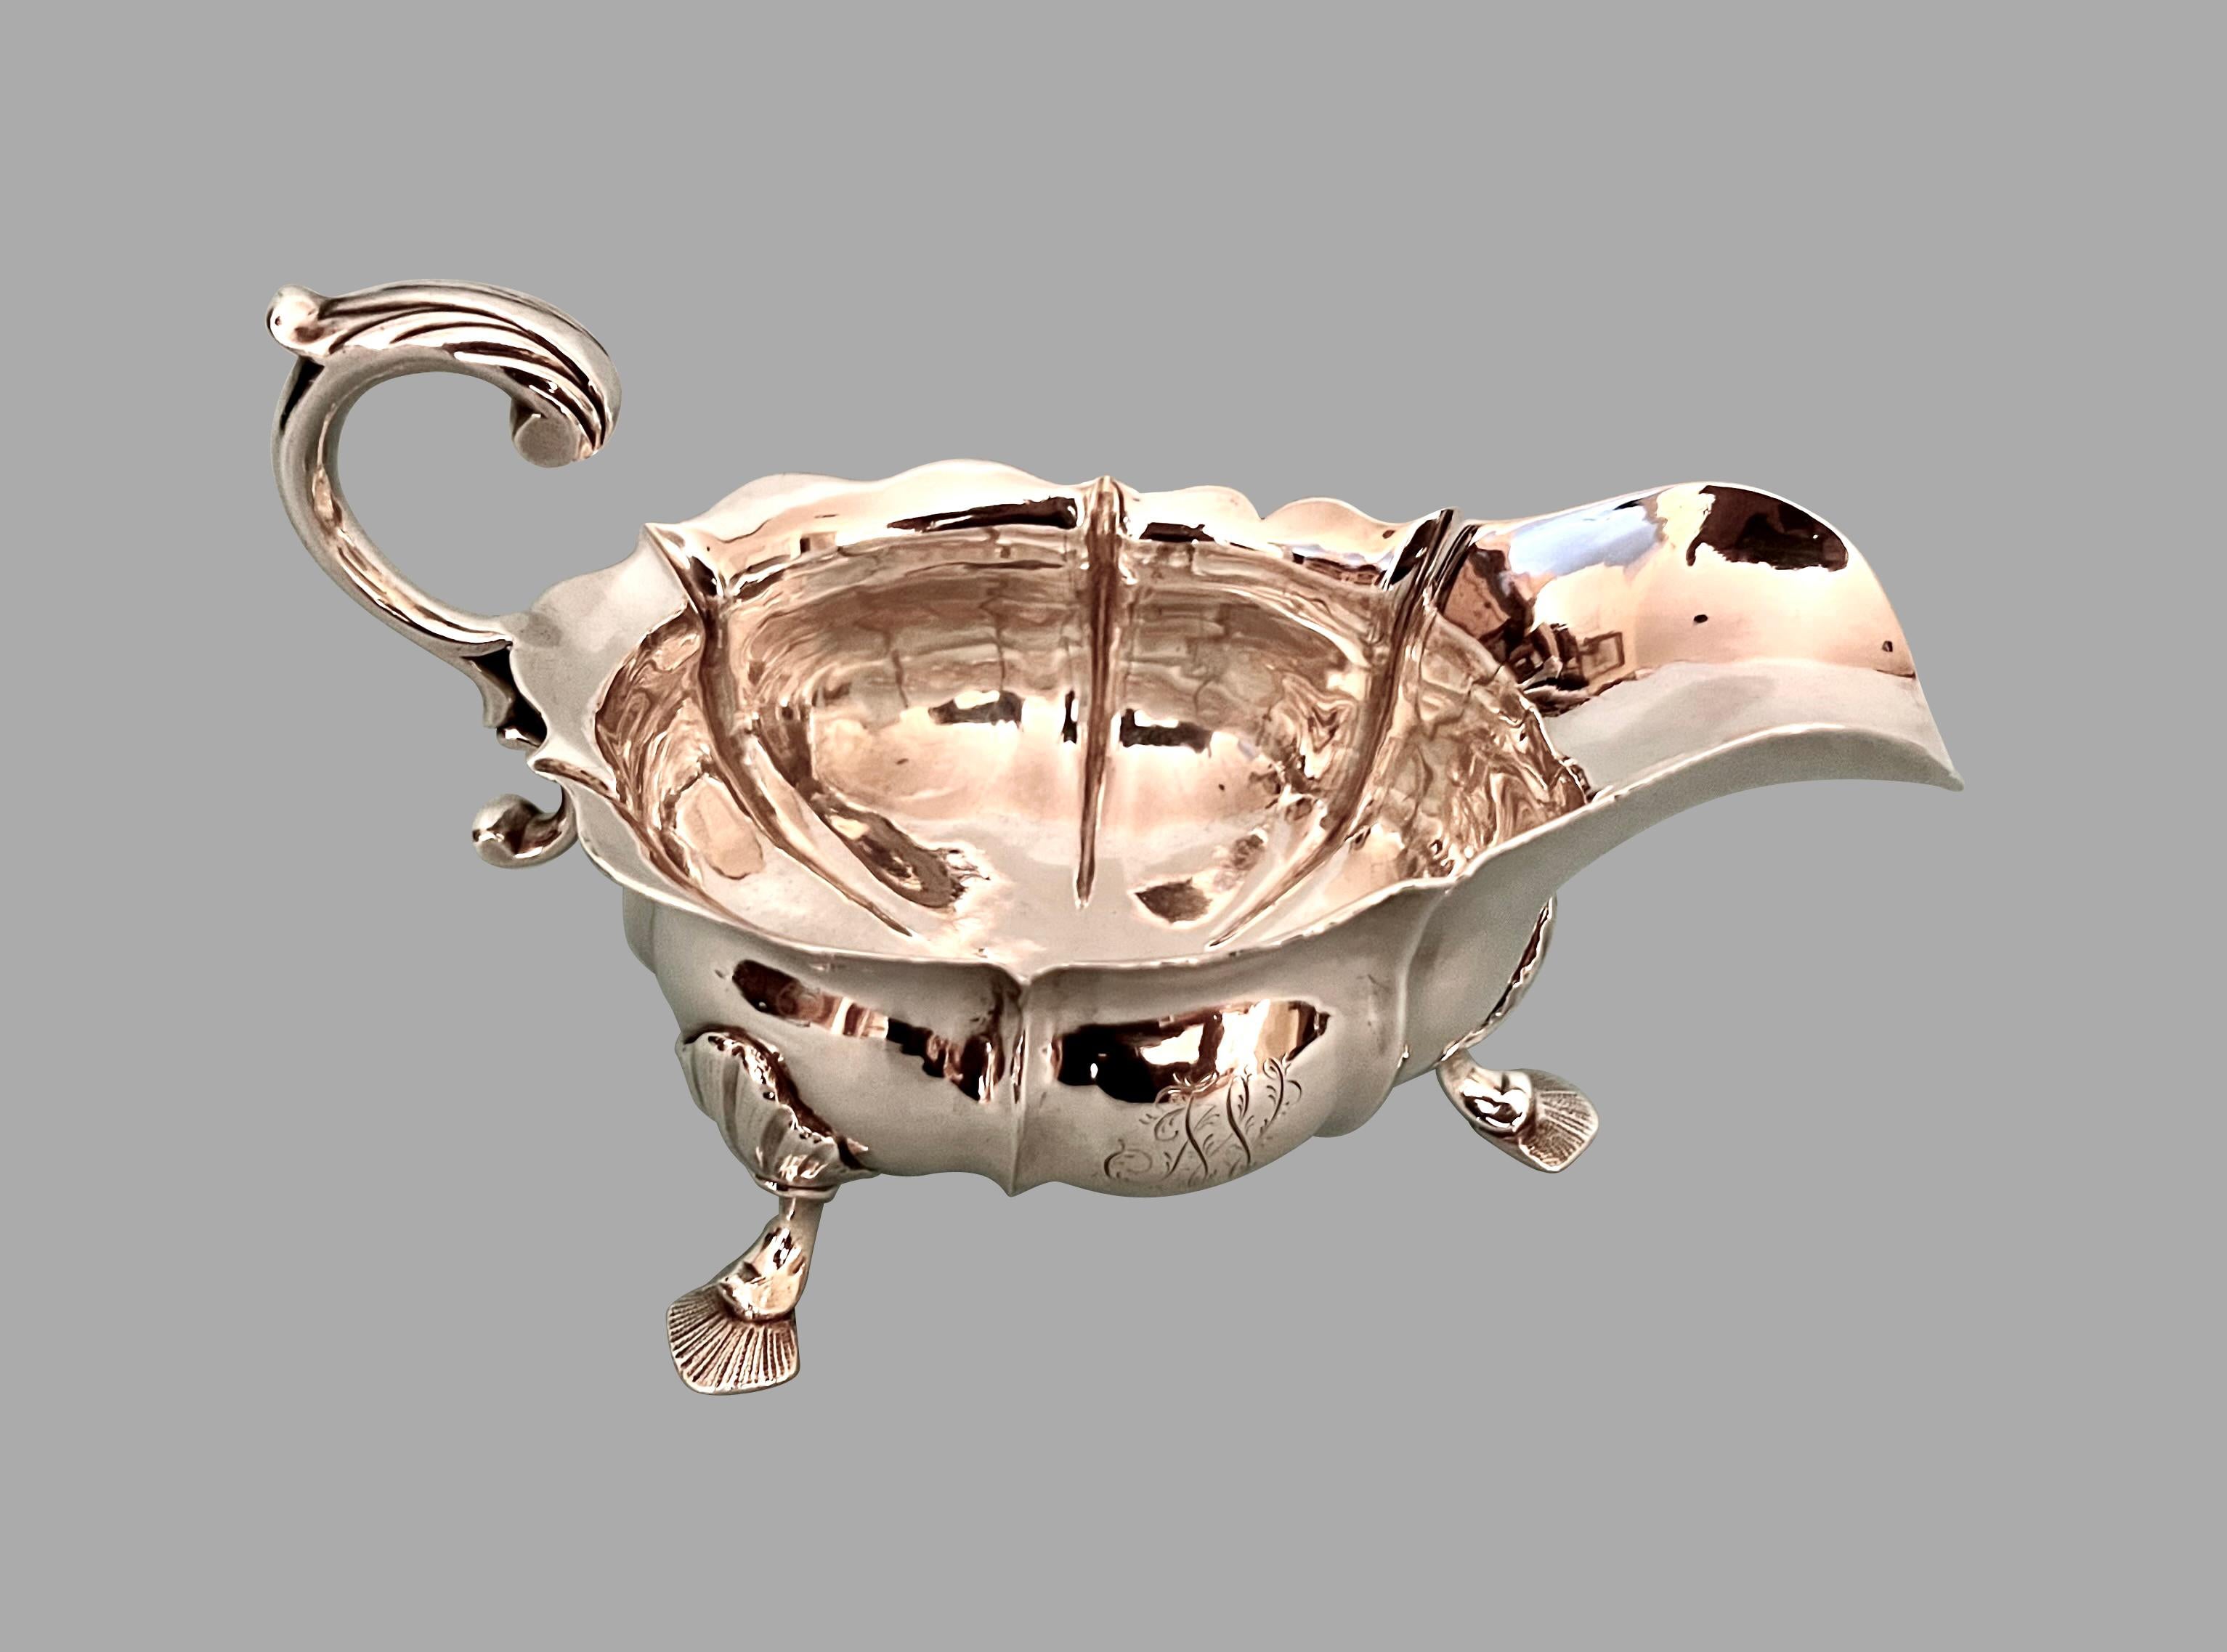 An English George II period sterling silver sauce boat of typical form, the base hallmarked JB with other hallmarks, (except the lion passant) rubbed. Monogrammed on one side. An elegant heavy gauge sauce boat. Weight 320 grams.